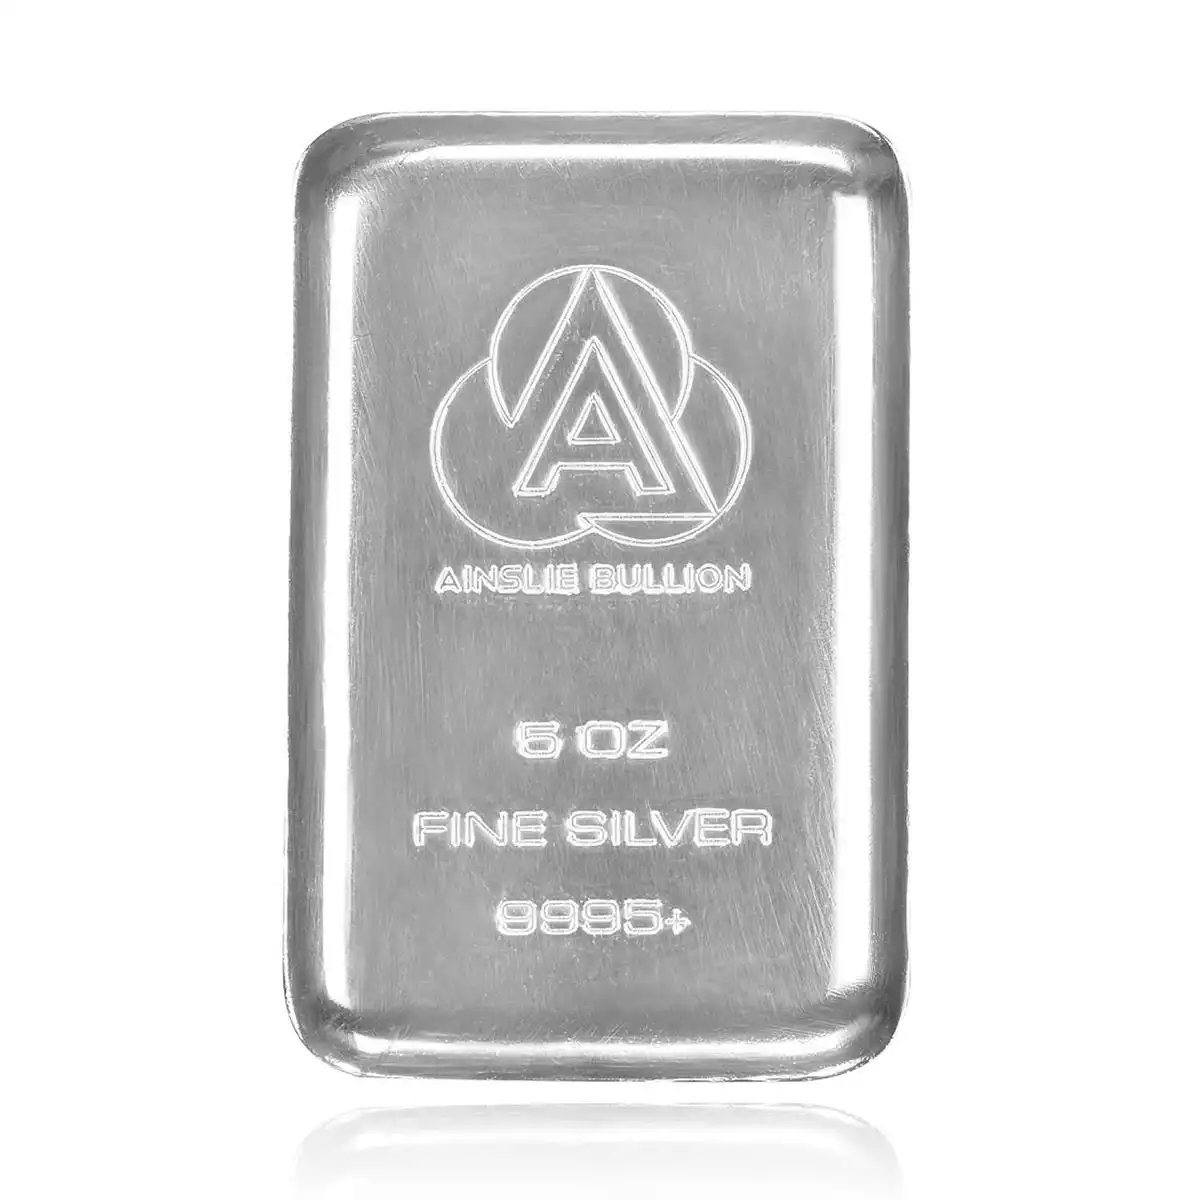 5oz ainslie silver bullion. the 5 oz ainslie silver bar strikes a nice balance of small size at an affordable price. the sleek and compact design make...